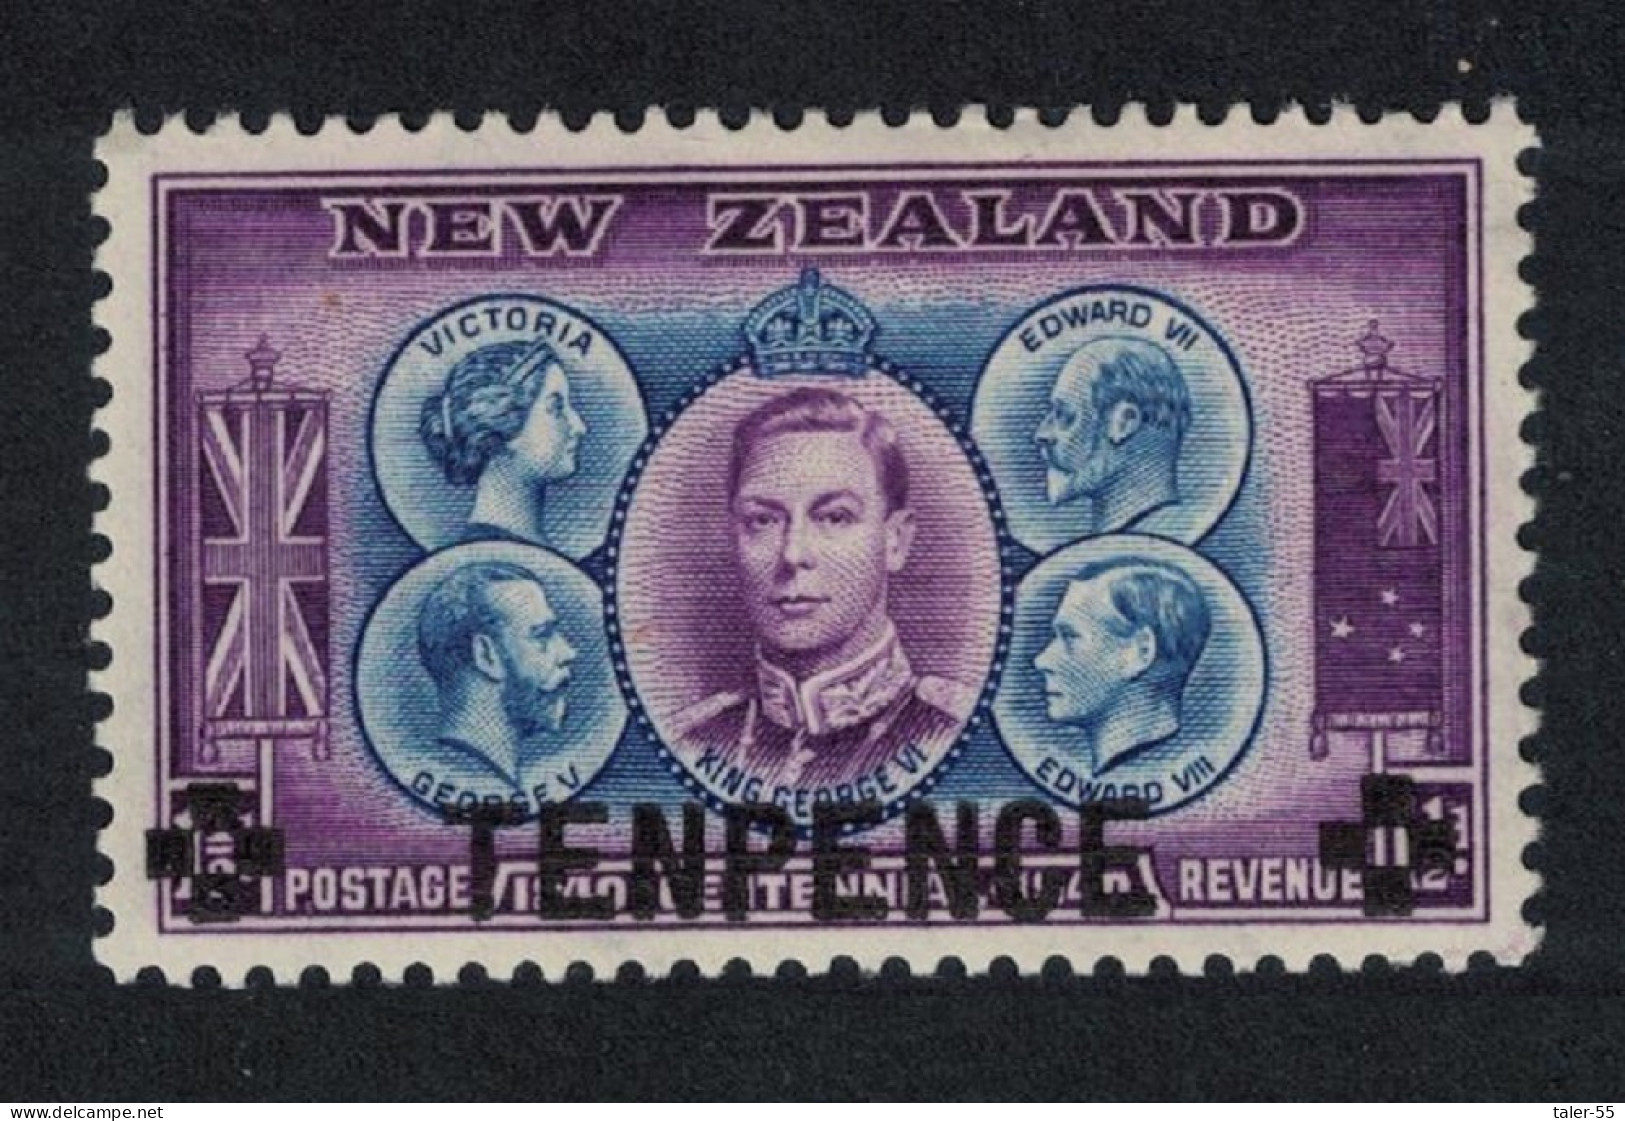 New Zealand Surch 'TENPENCE' Between Crosses 1944 MNH SG#662 - Unused Stamps